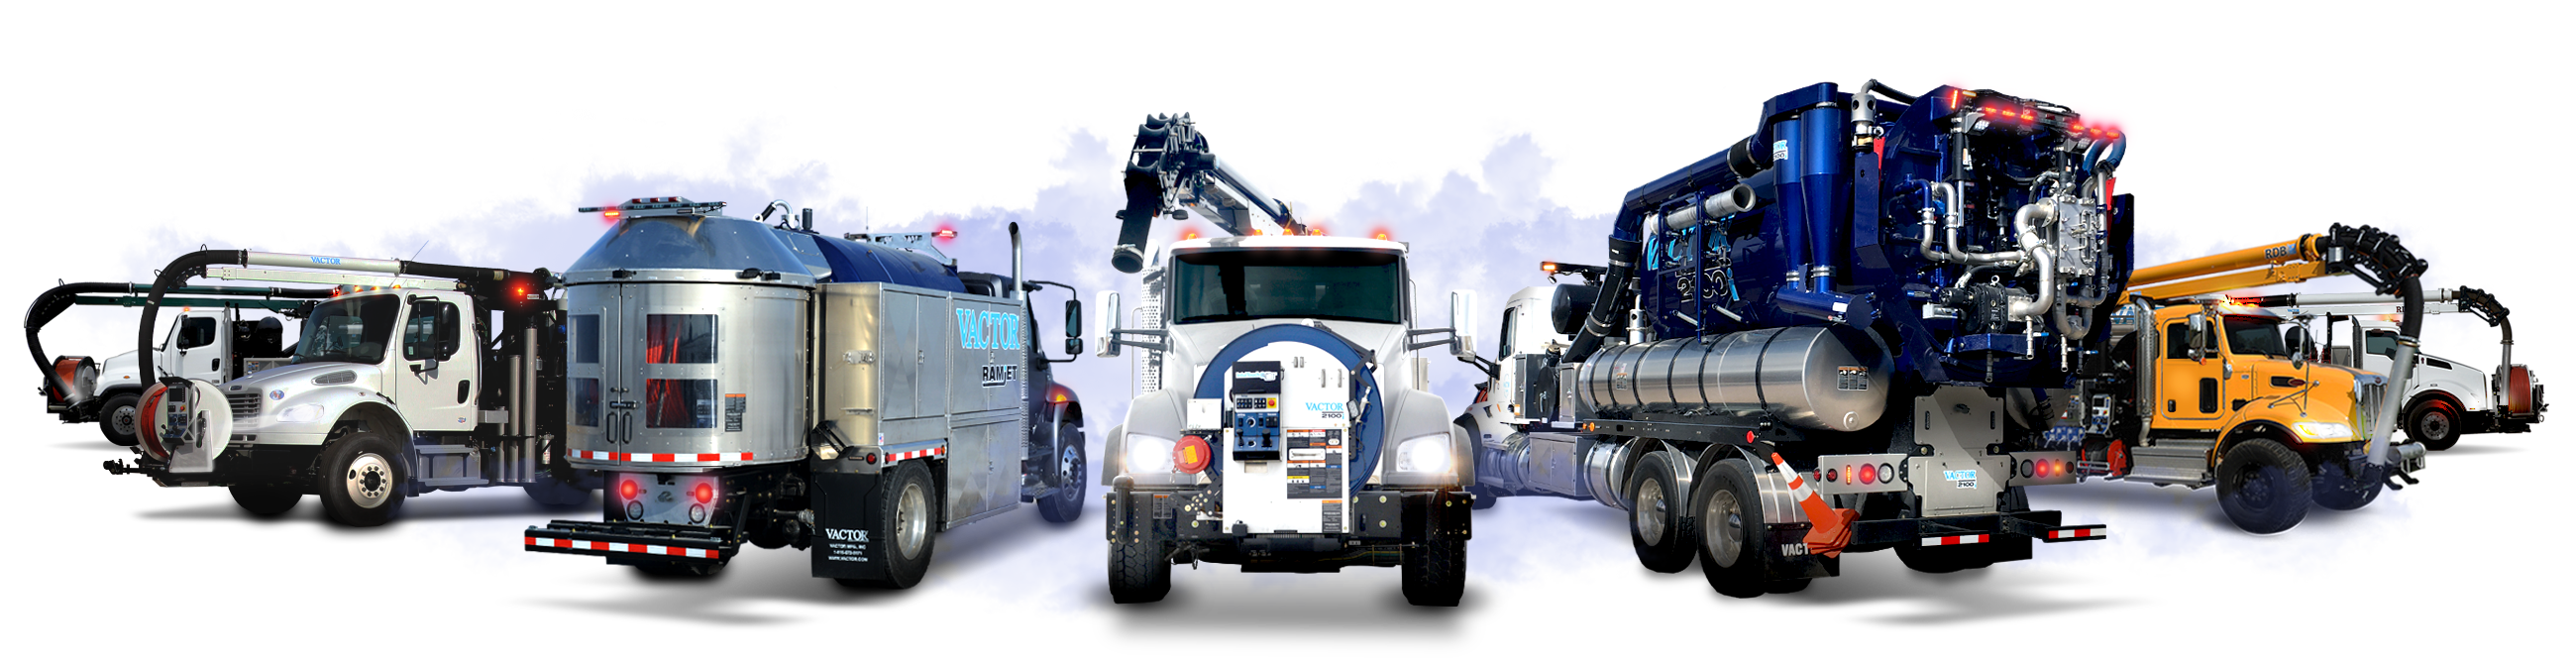 Vactor Line of Sewer Cleaner Trucks